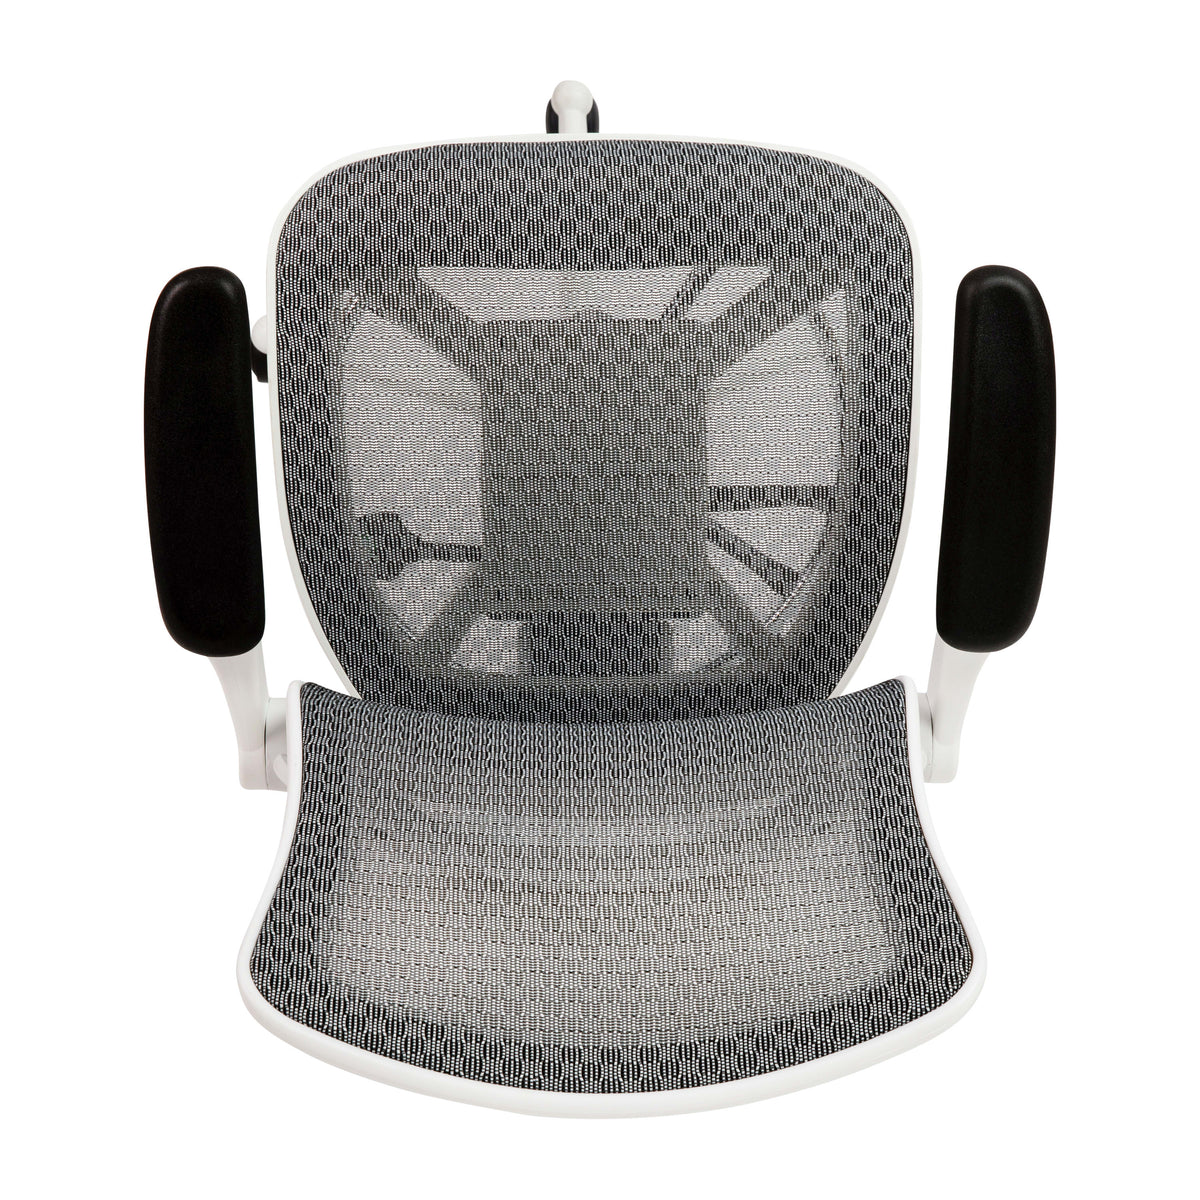 Gray Mesh/White Frame |#| Gray Mid-Back Mesh Drafting Chair with White Frame and Flip-Up Arms